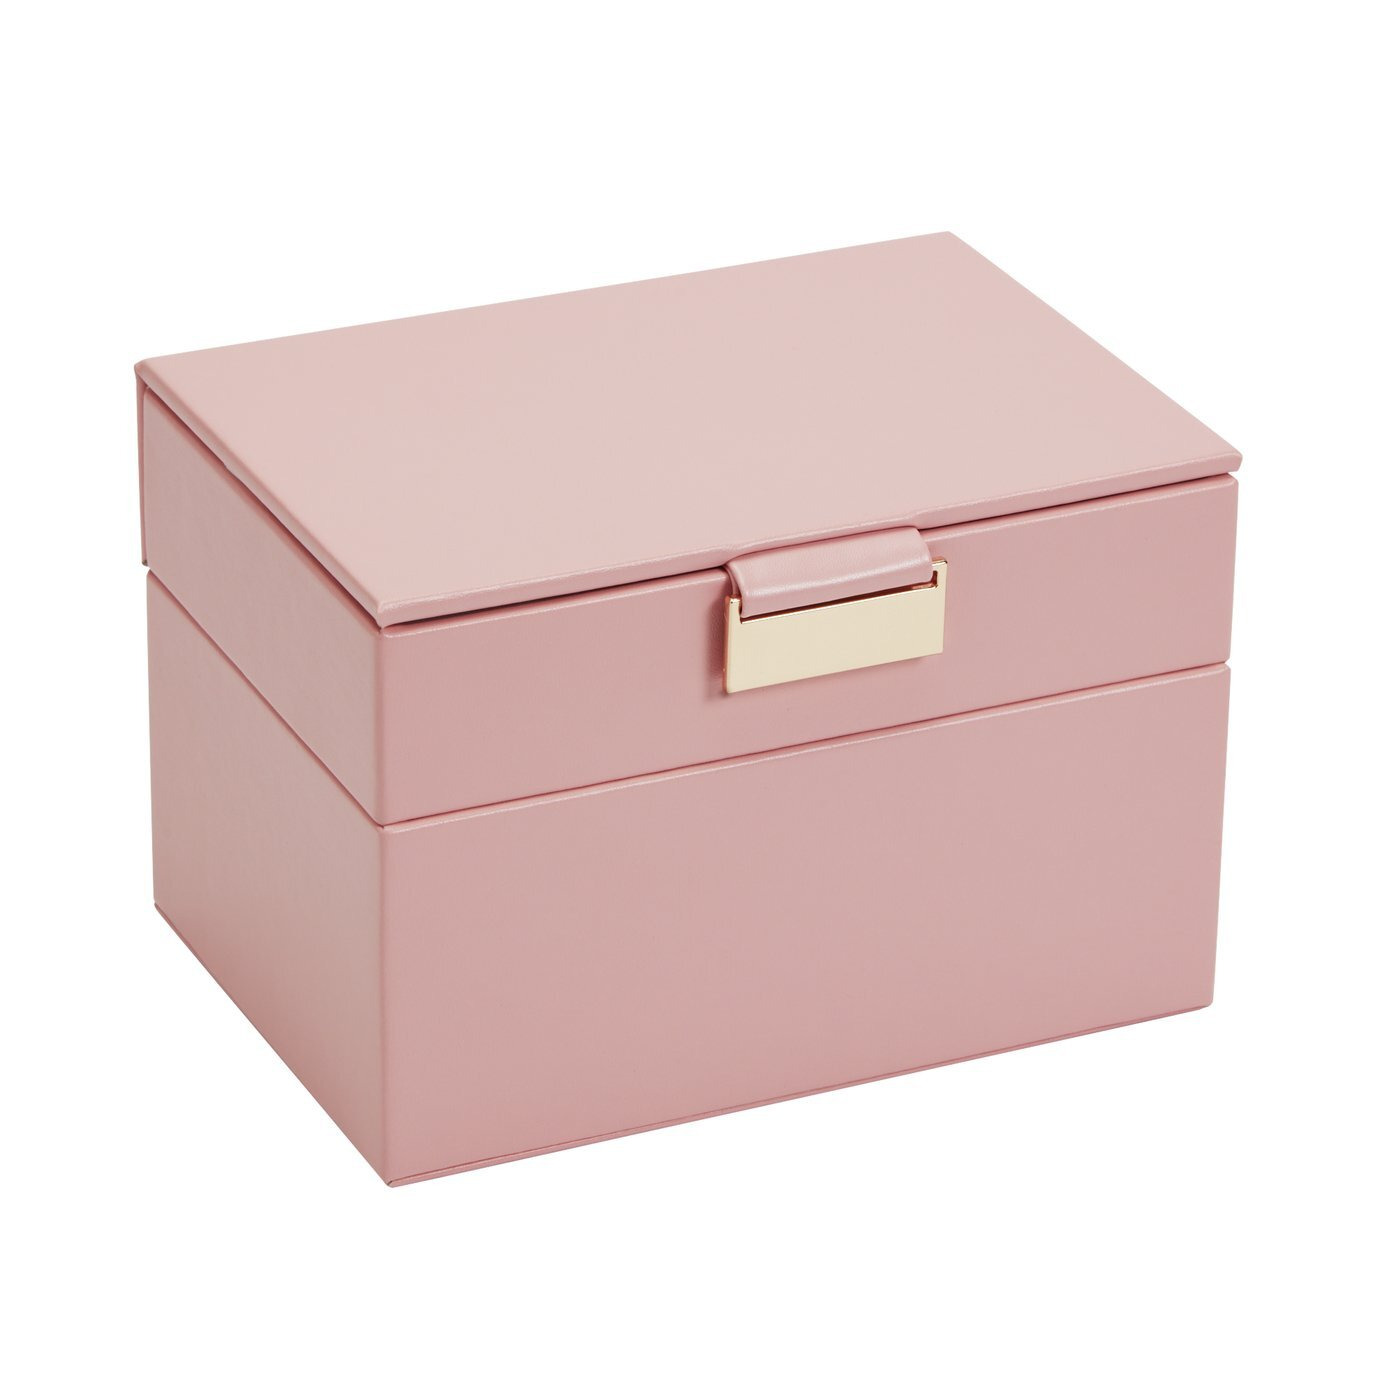 Argos Home Faux Leather Classic Lift Top Jewellery Box - image 1